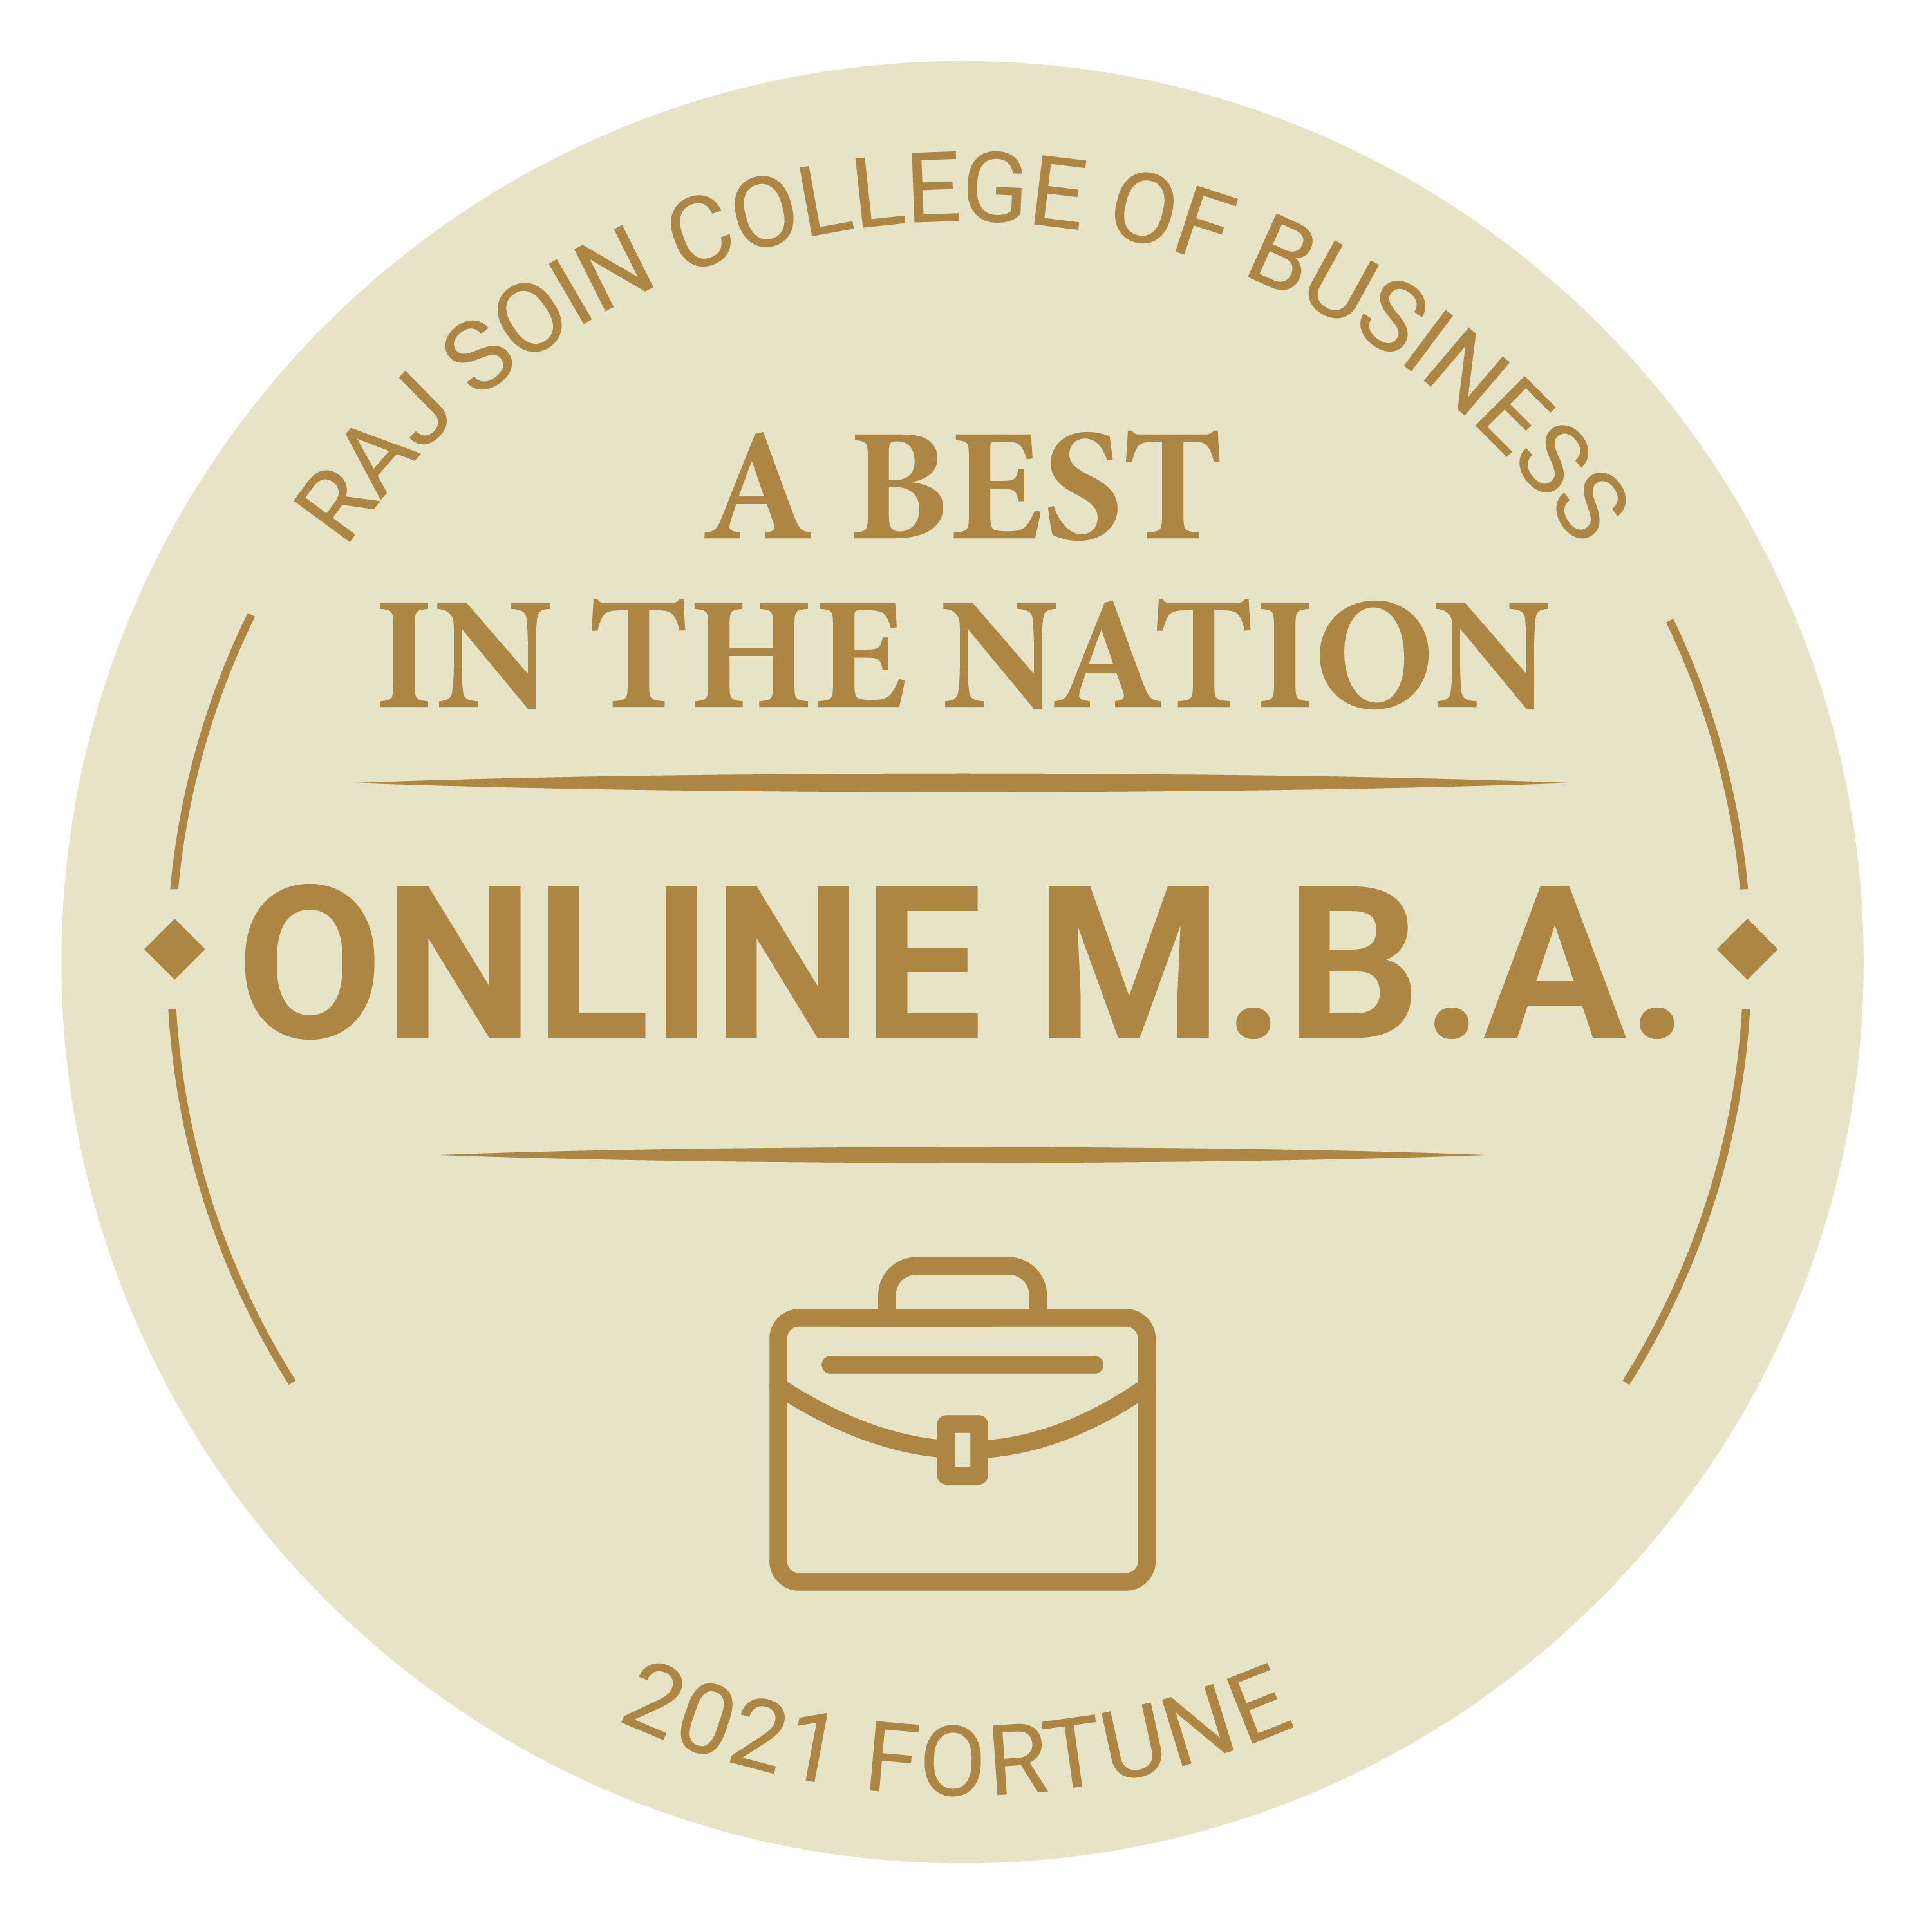 2021 Fortune Raj Soin College of Business Online Master's of Business Administration Ranked top in the nation